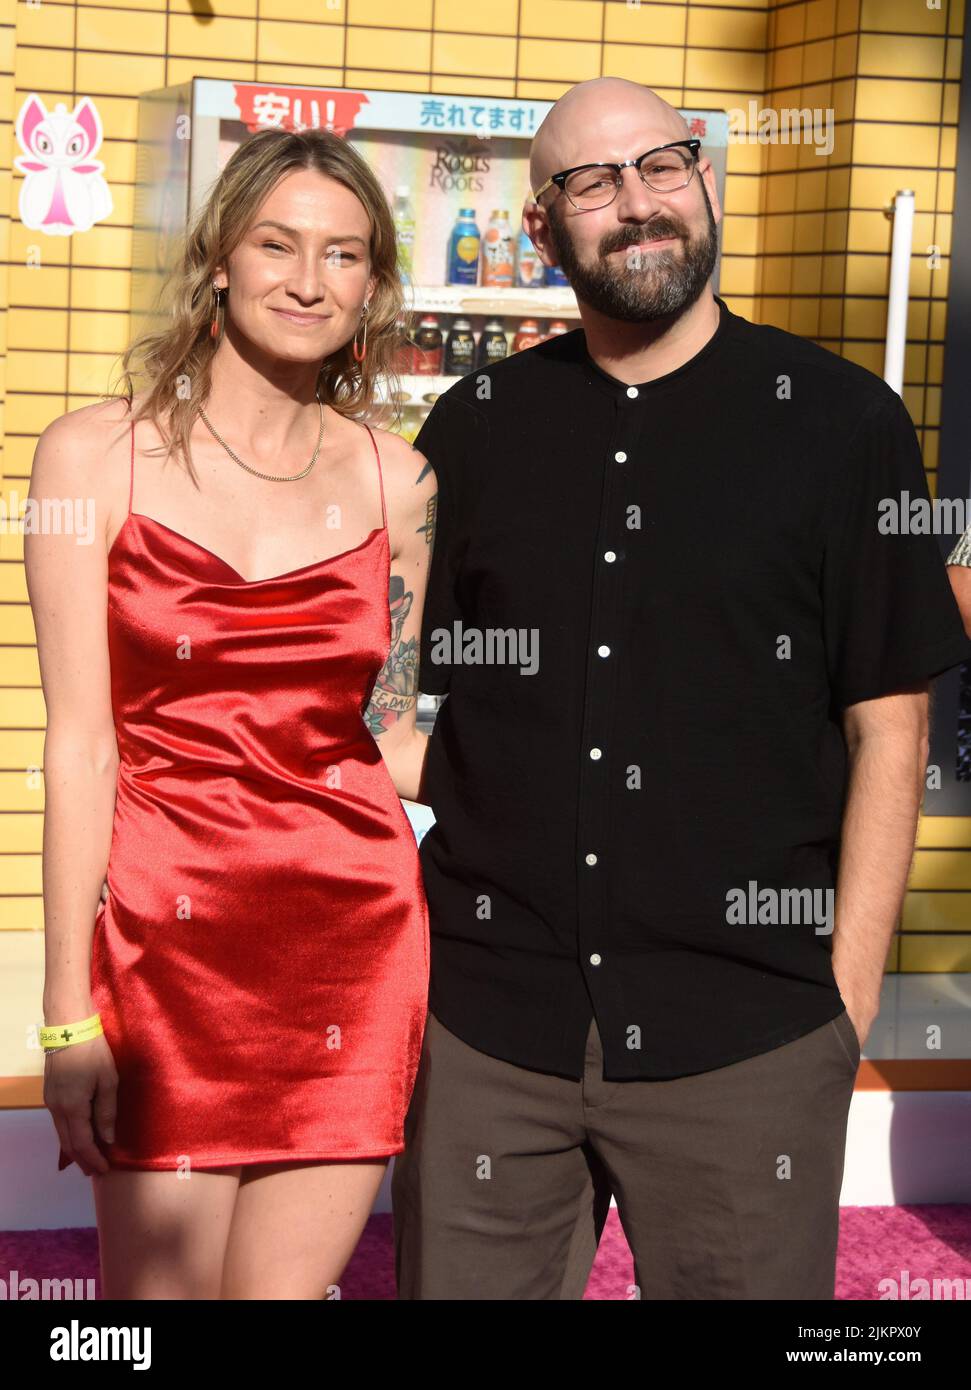 Los Angeles, California, USA 1st August 2022 Chloe Rice and Alex Pardee attend the Los Angeles Premiere of Columbia Pictures' 'Bullet Train' at Regency Village Theatre on August 1, 2022 in Los Angeles, California, USA. Photo by Barry King/Alamy Stock Photo Stock Photo